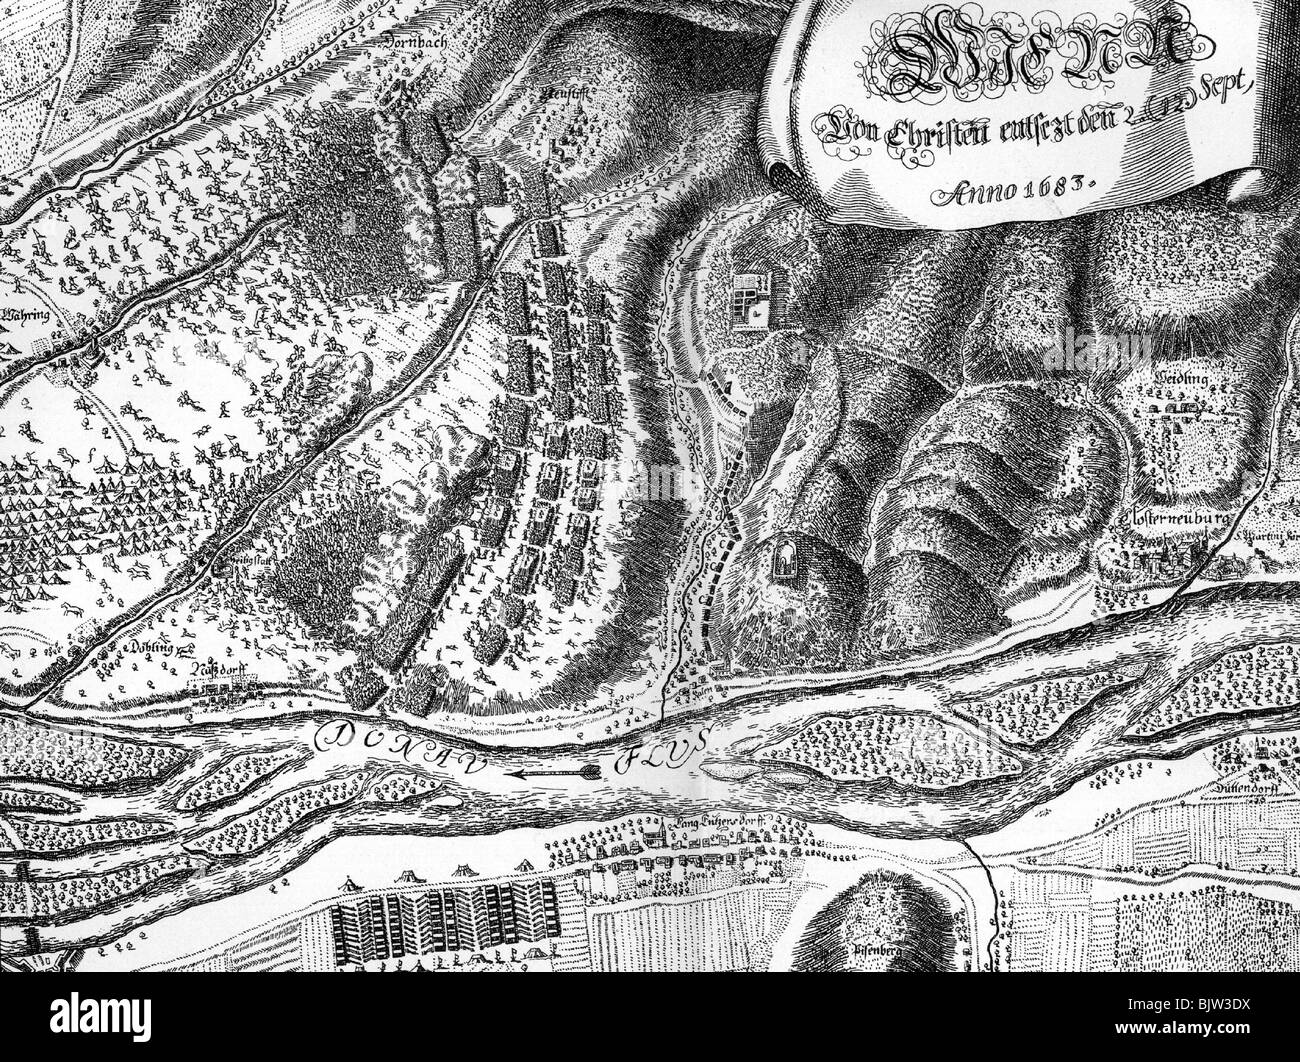 events, Turkish-Austrian War 1683 - 1689, Battle of Vienna at Kahlen Berg, 12.9.1683, plan of the battle, contemporary copper engraving by Daniel Suttinger, 17th century, historic, historical, Austria, siege, victory of the confederation army from Poland, Bavaria, Saxony, Franconia and Imperial troops under King Kohann II Sobiesky of Poland over the Turkish under Grand Vezir Merzifonlu Kara Mustafa Pasha, Ottoman Empire, Christians against Moslem, Muslim, Moslems, Muslims, defeat of Ottomans, Danube River, Doebling, Heiligenstadt, Neustift, Klosterneuburg, camp, Stock Photo